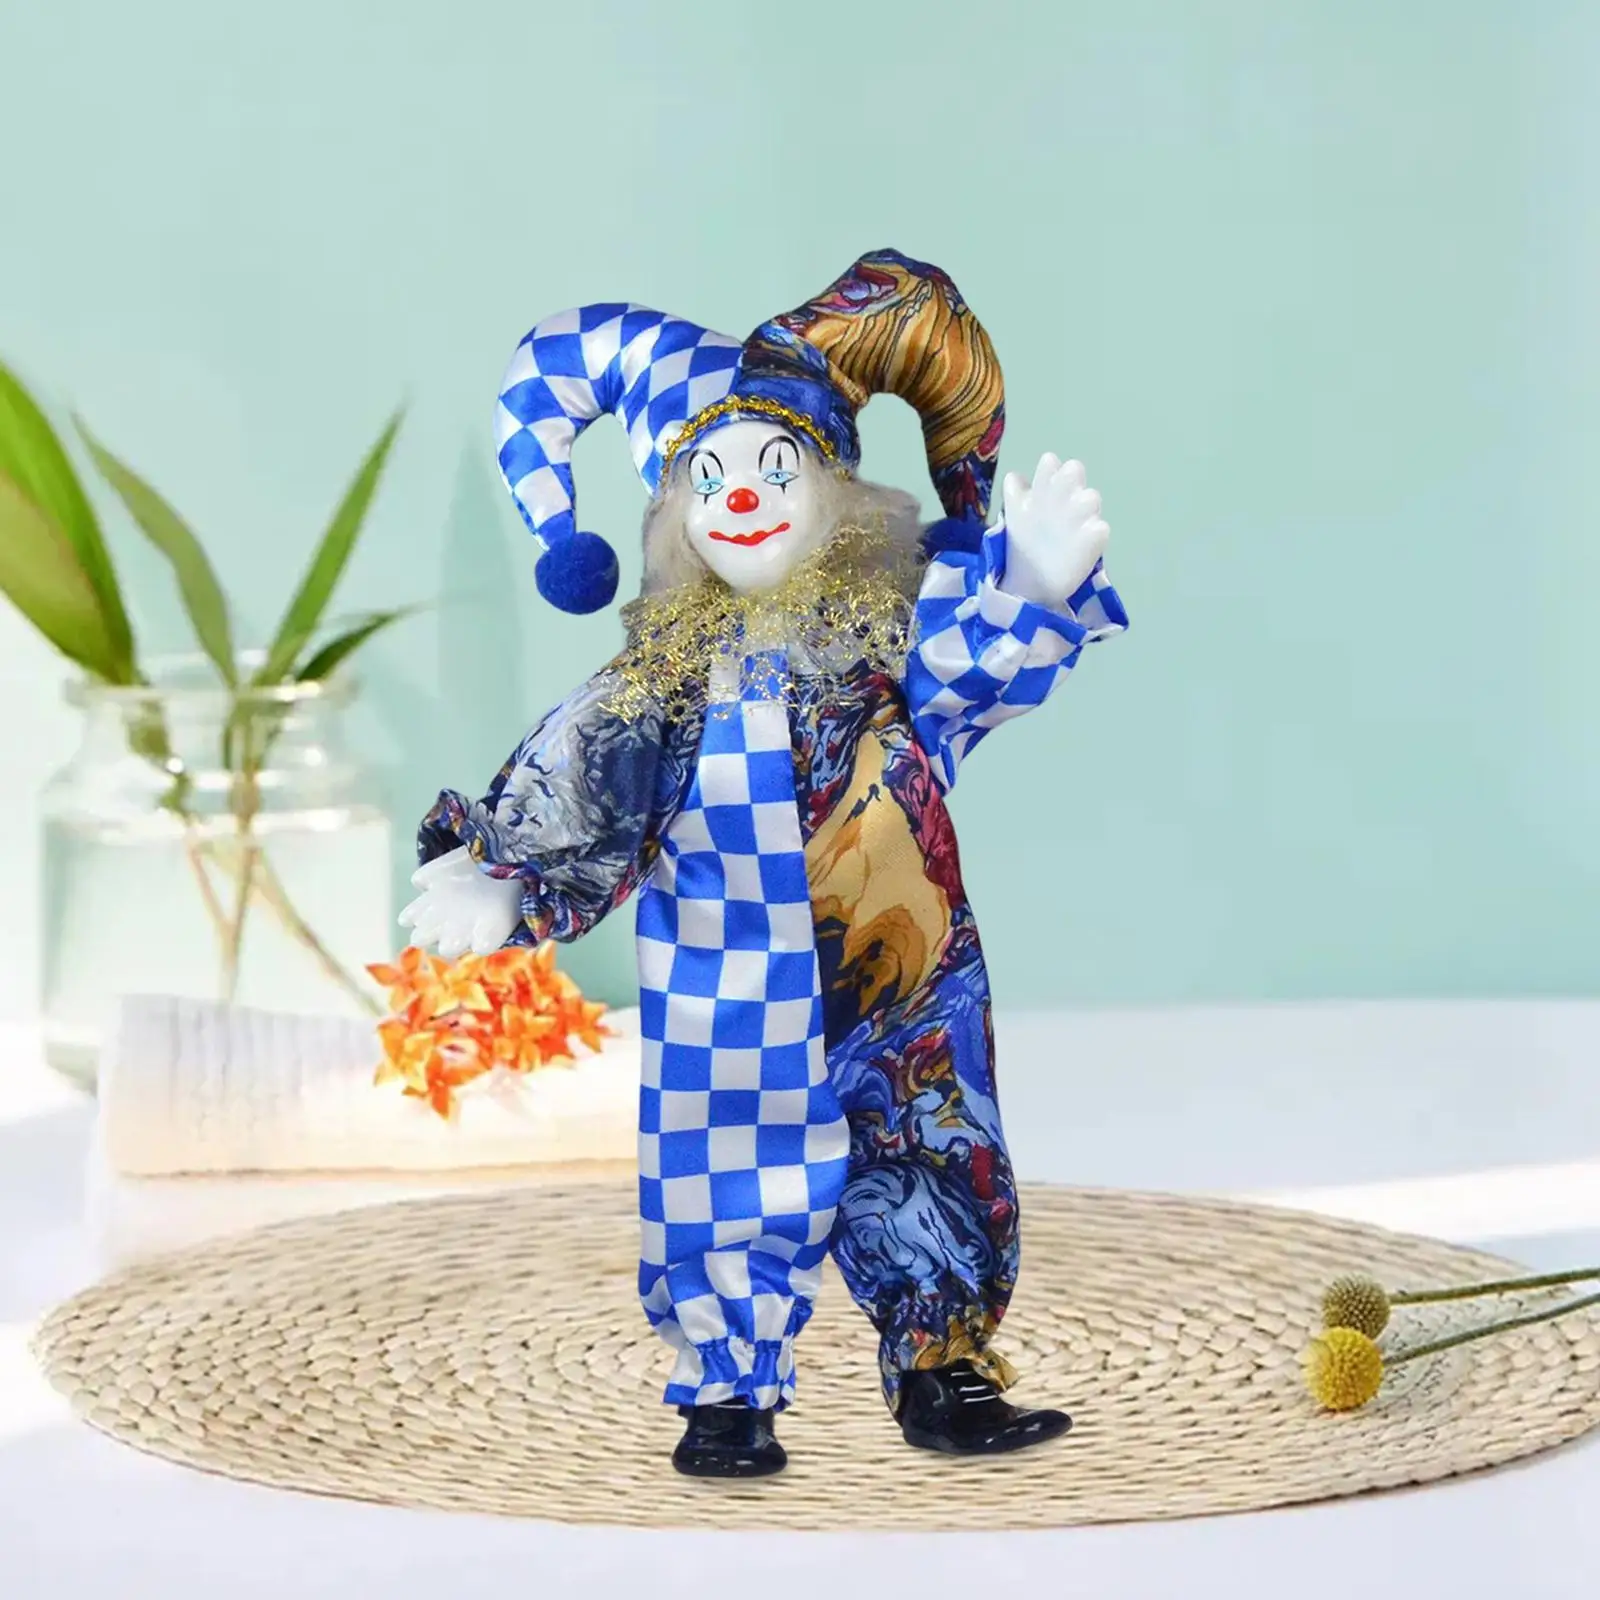 Clown Doll, 24cm in Height, Porcelain Clown Model Delicate Home Decoration Free Standing for Game Prop Valentin Gift